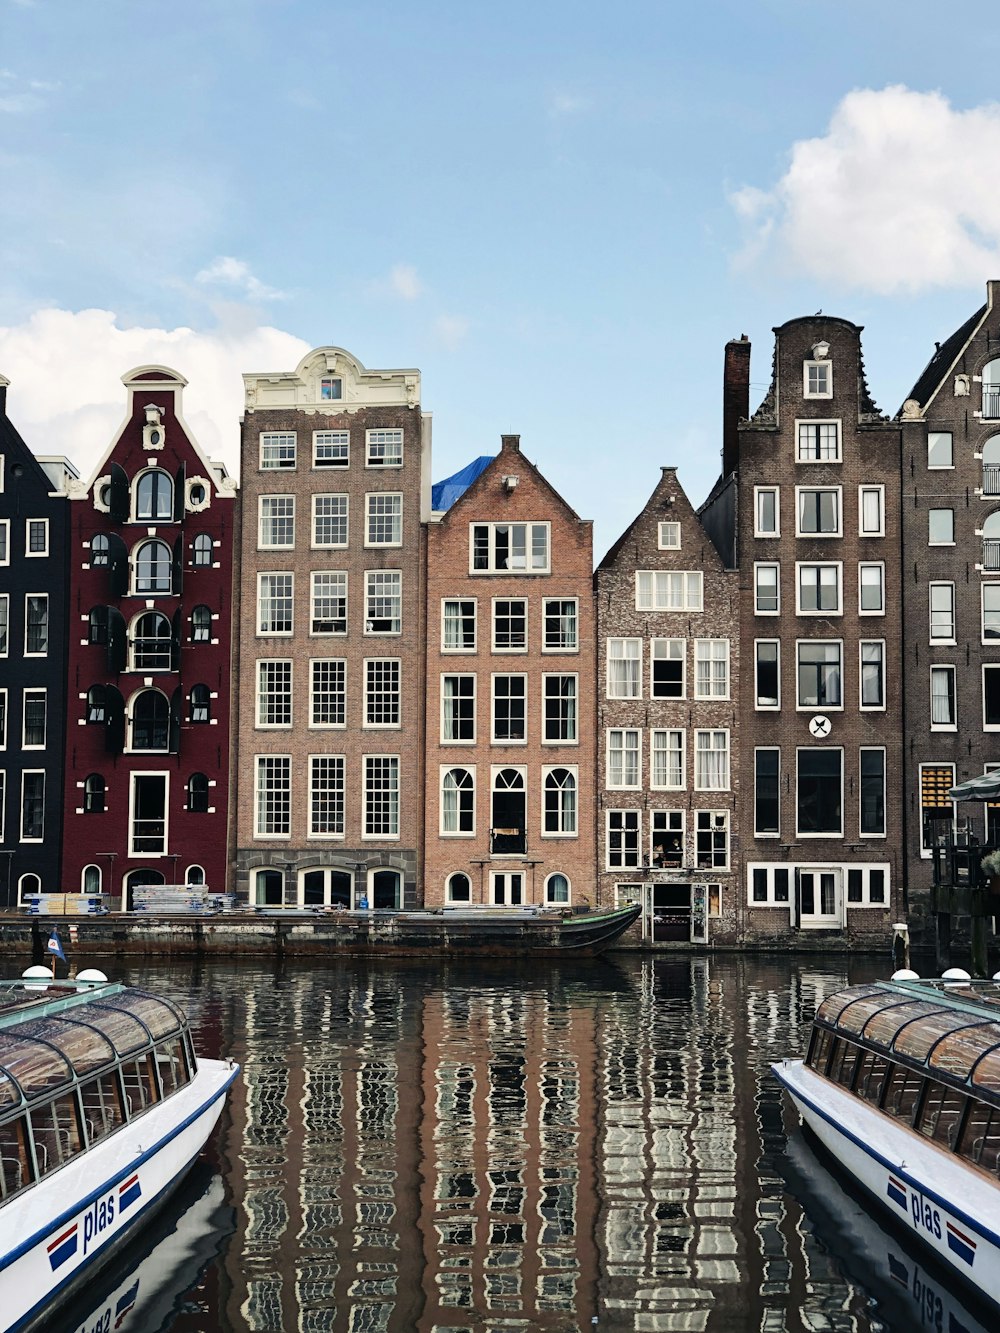 reflection of canal houses on body of water